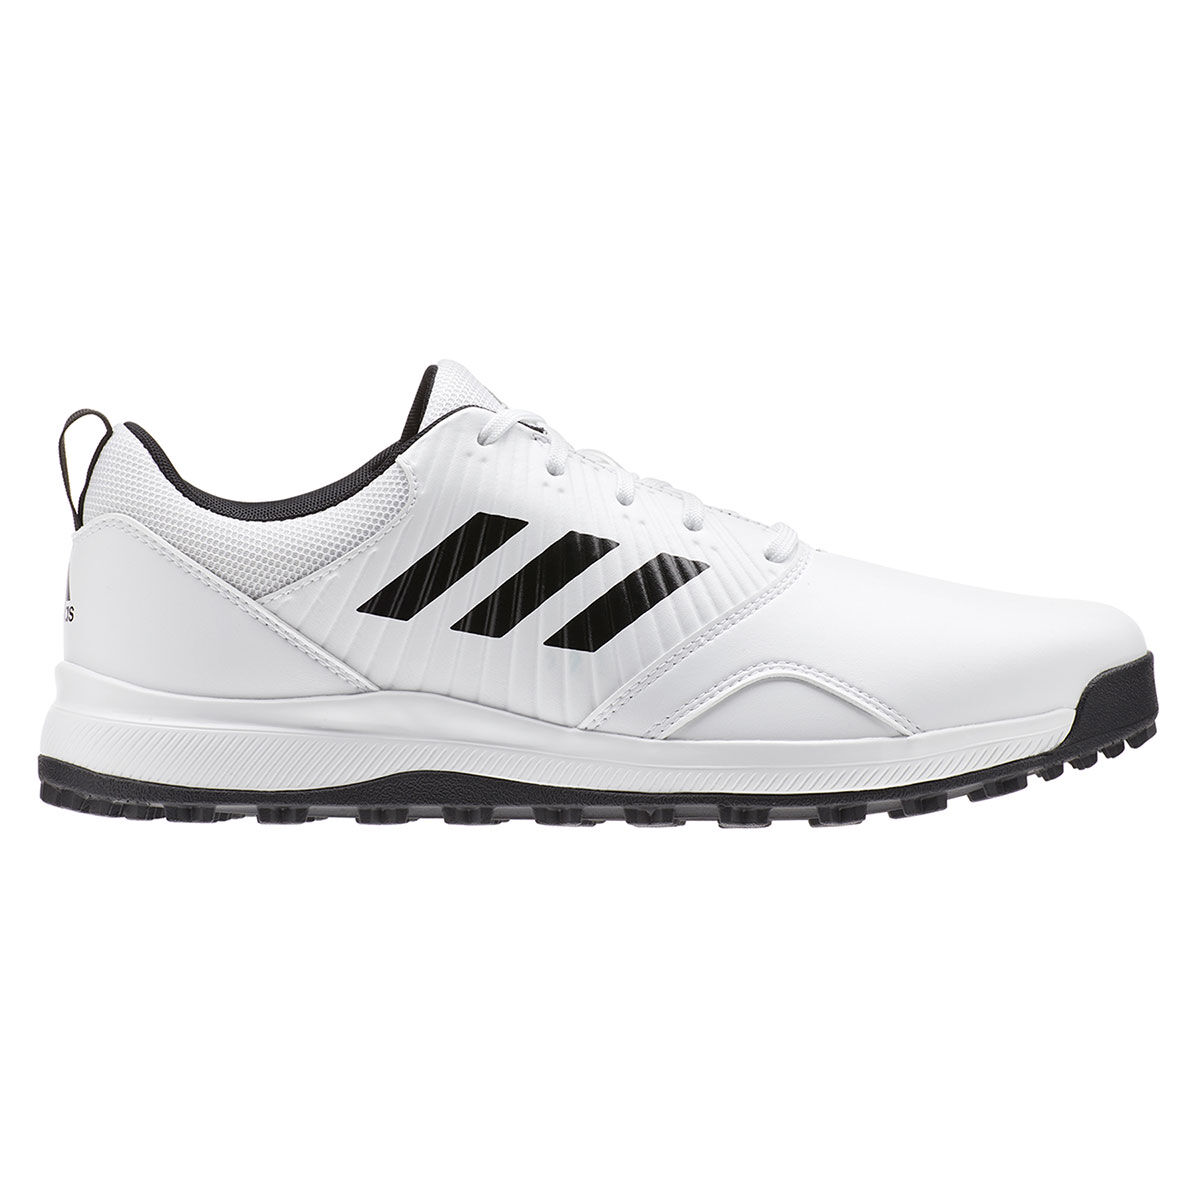 adidas Men's CP Traxion Spikeless Golf Shoes, Mens, White/core black/grey six, 10, Wide | American Golf von adidas Golf